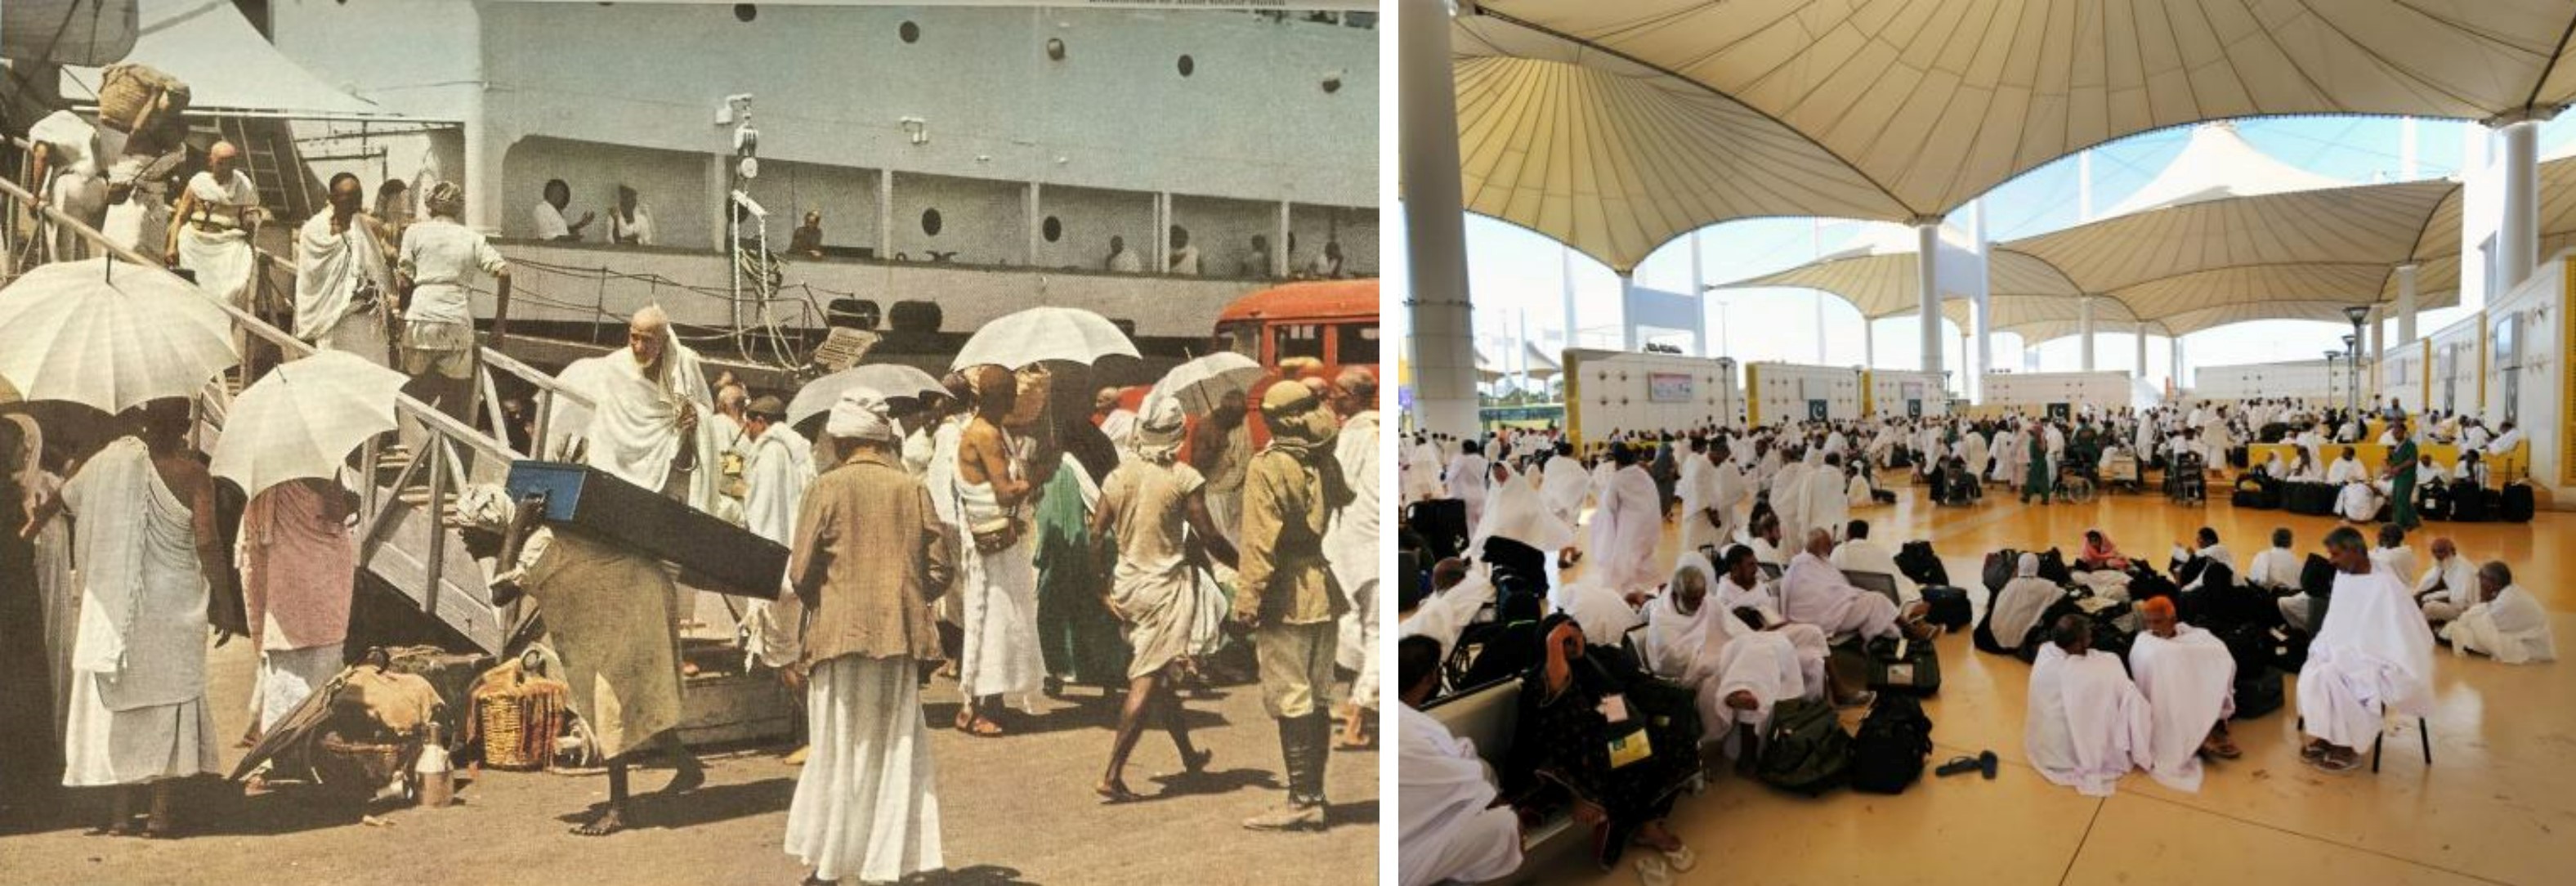 On the left, pilgrims arriving by ferry to Jeddah Port. On the right, the contemporary Hajj Terminal of the King Abdulaziz International Airport in Jeddah.